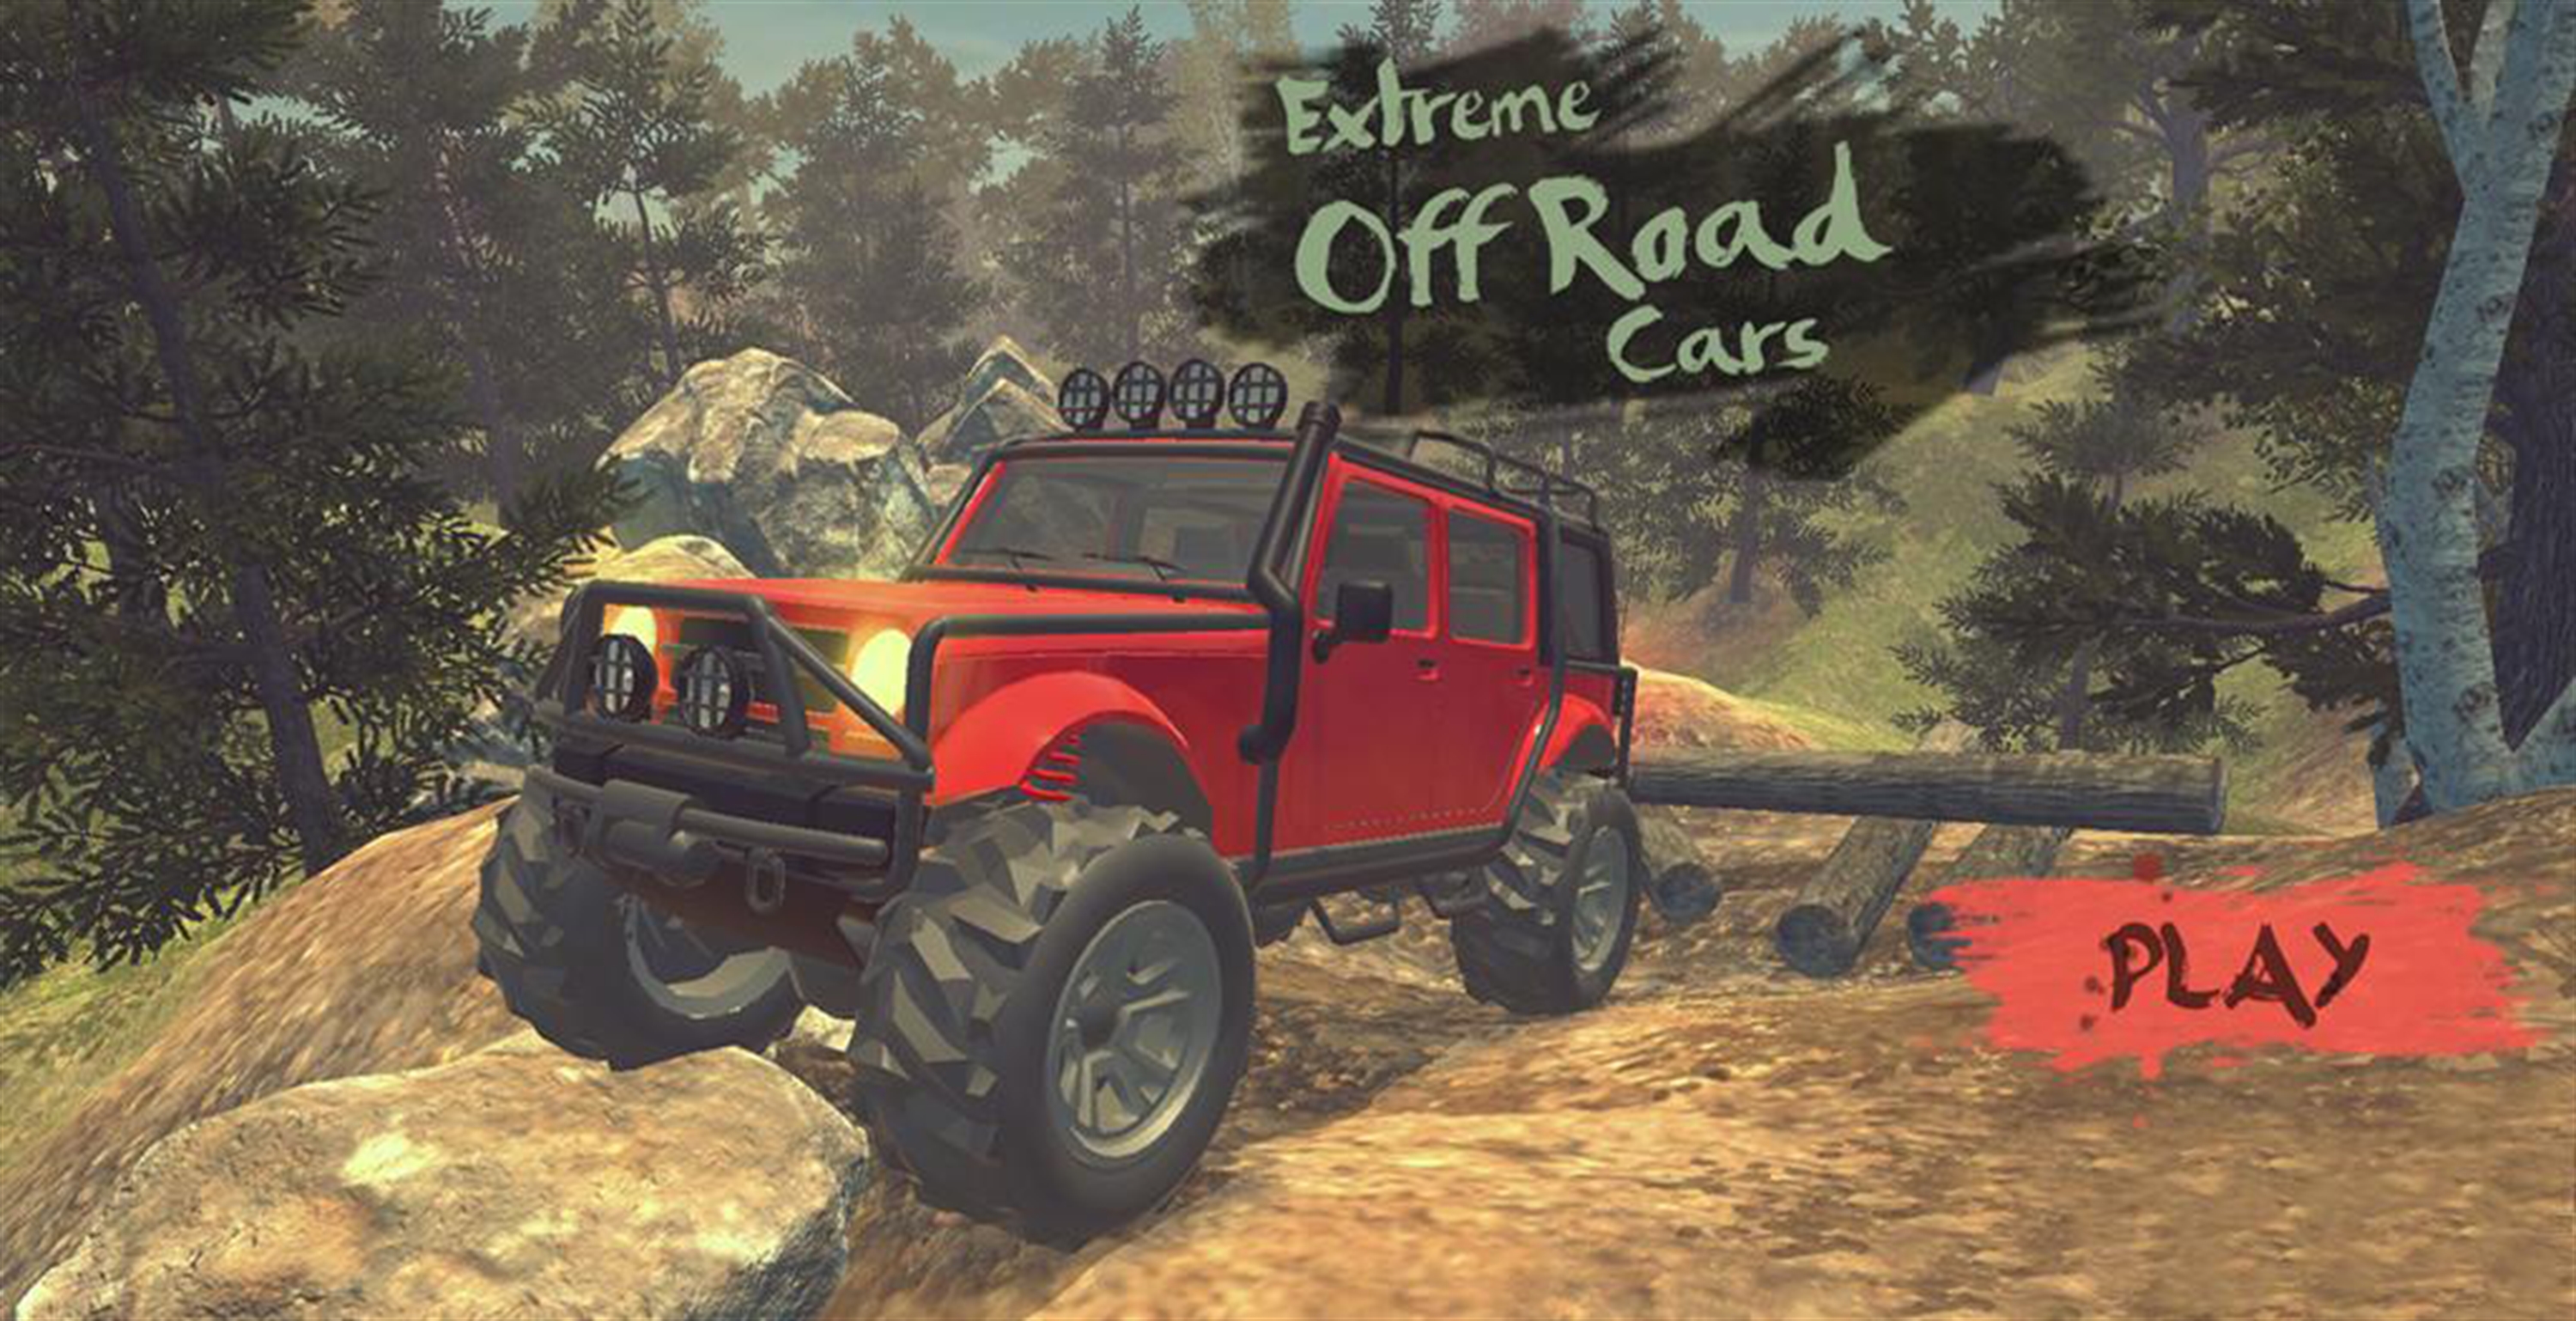 EXTREME OFF ROAD CARS 3: CARGO - Play for Free!